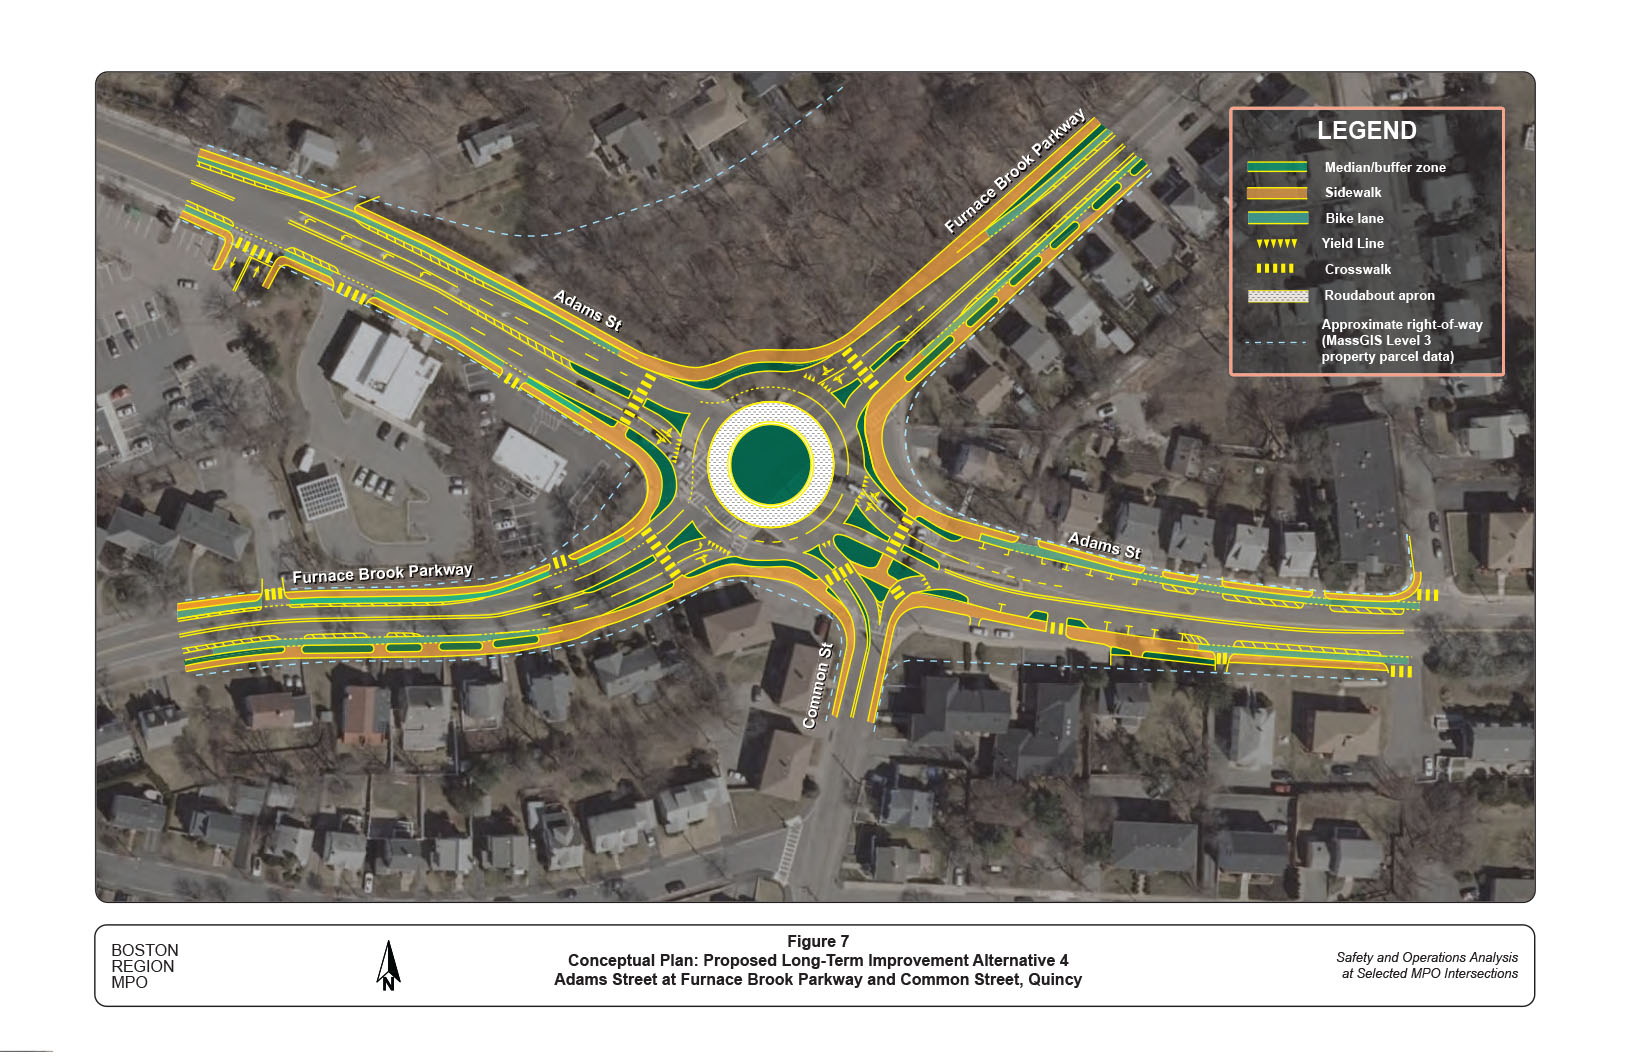 Figure 7: Proposed Long-Term Improvement Alternative 4
This figure shows a conceptual plan view of the proposed roadway modifications in the long-term improvement Alternative 4.
